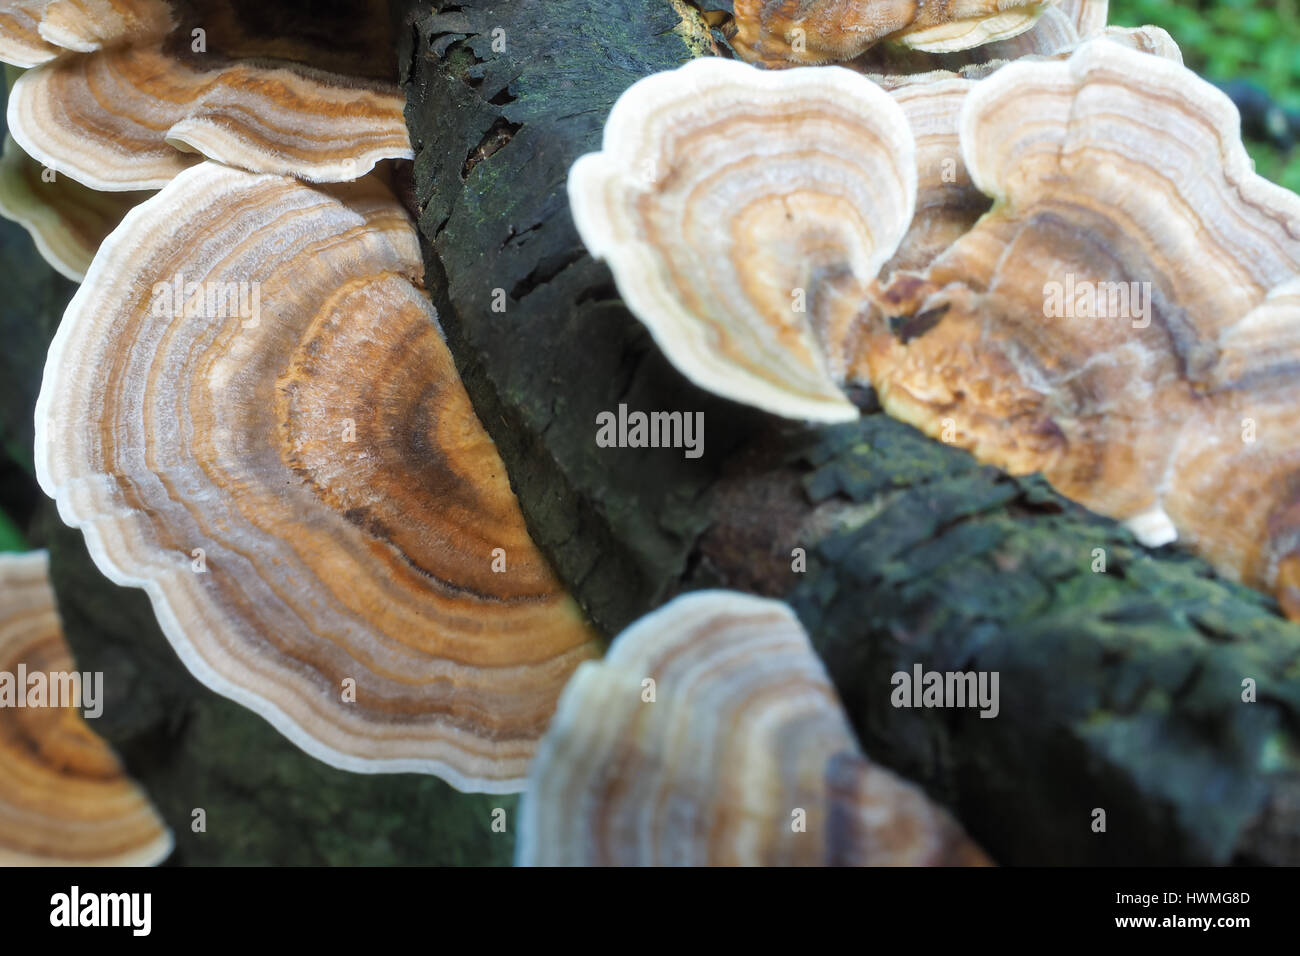 Bracket Fungus on a rotting tree branch, in close-up. Stock Photo